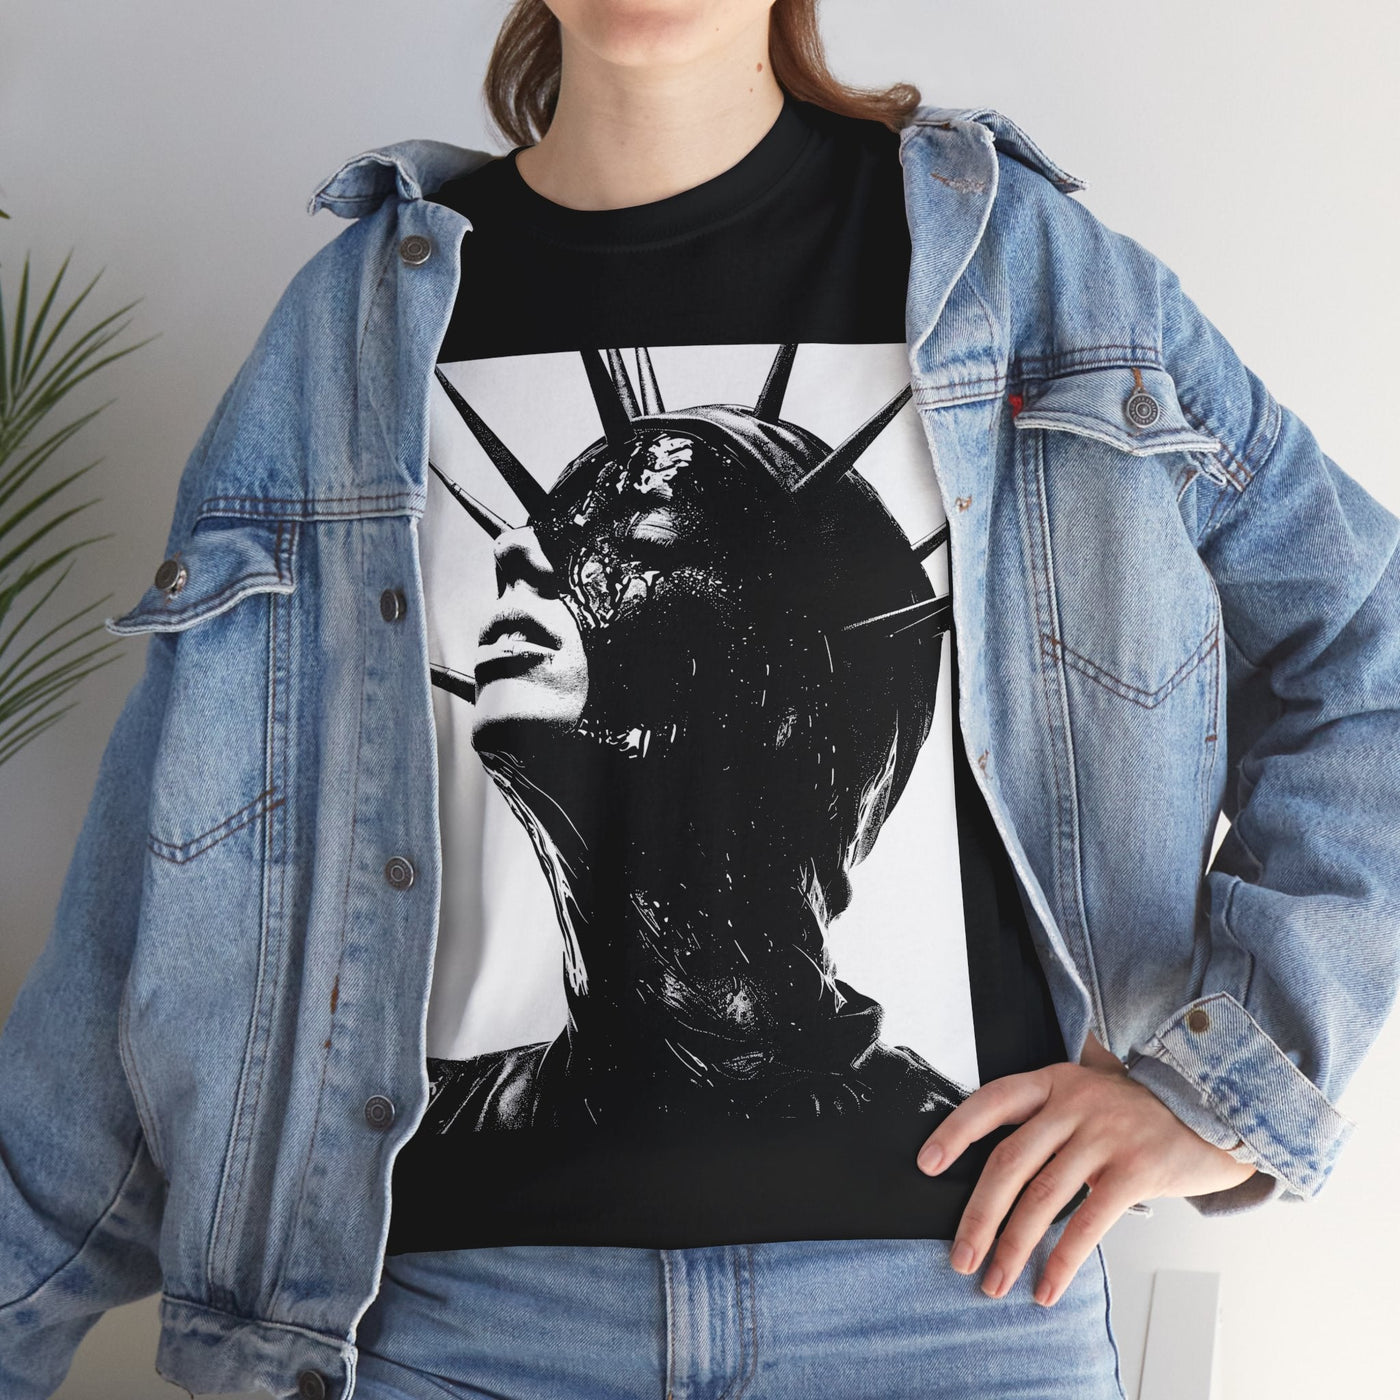 Wicked Girl with Spiky Latex Hood T-Shirt